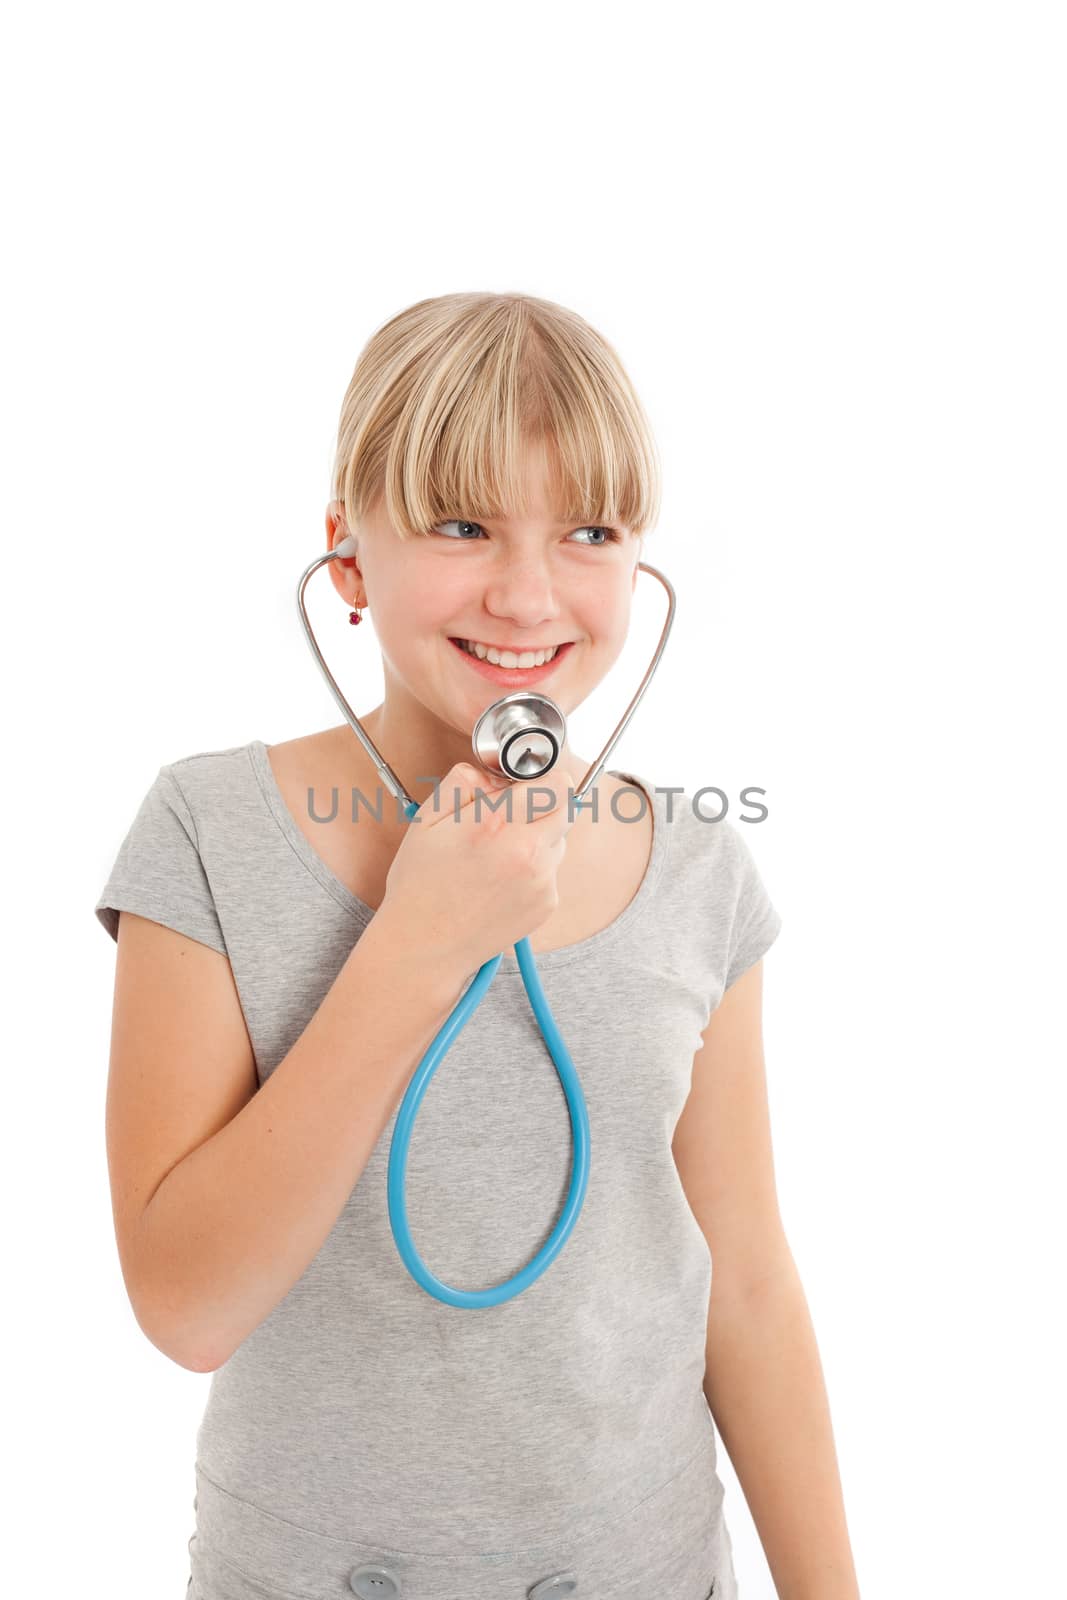 Fooling around with a stethoscope by bandika